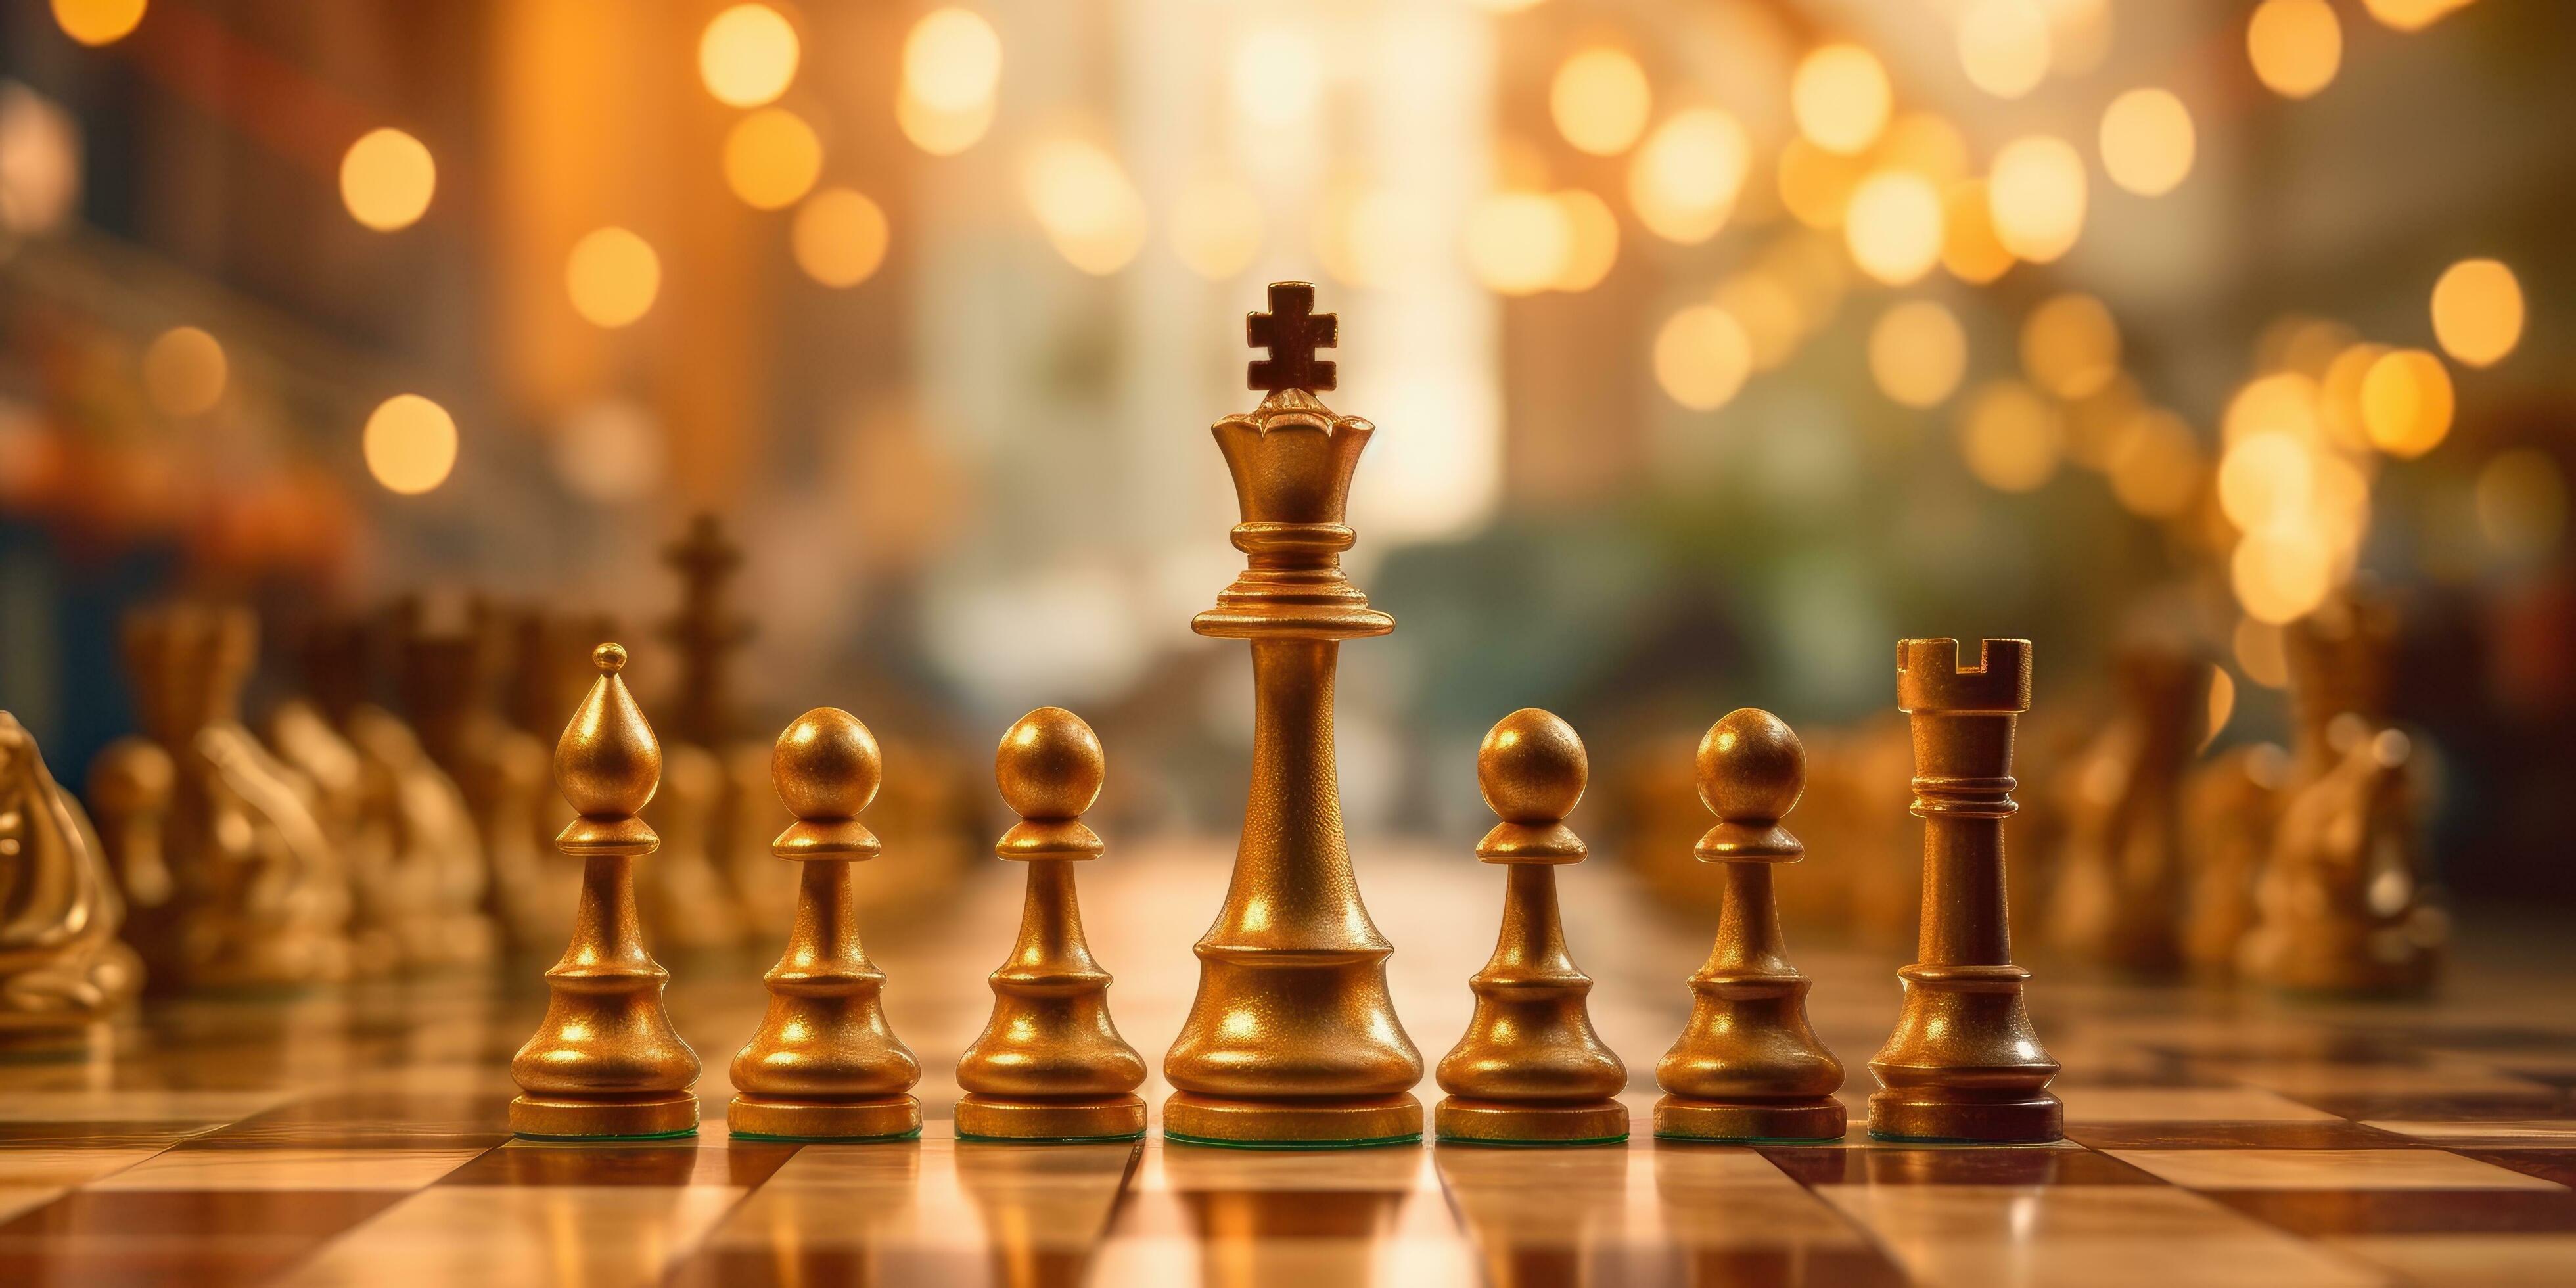 King chess standing on chess board. Business planning, strategy and leadership concept